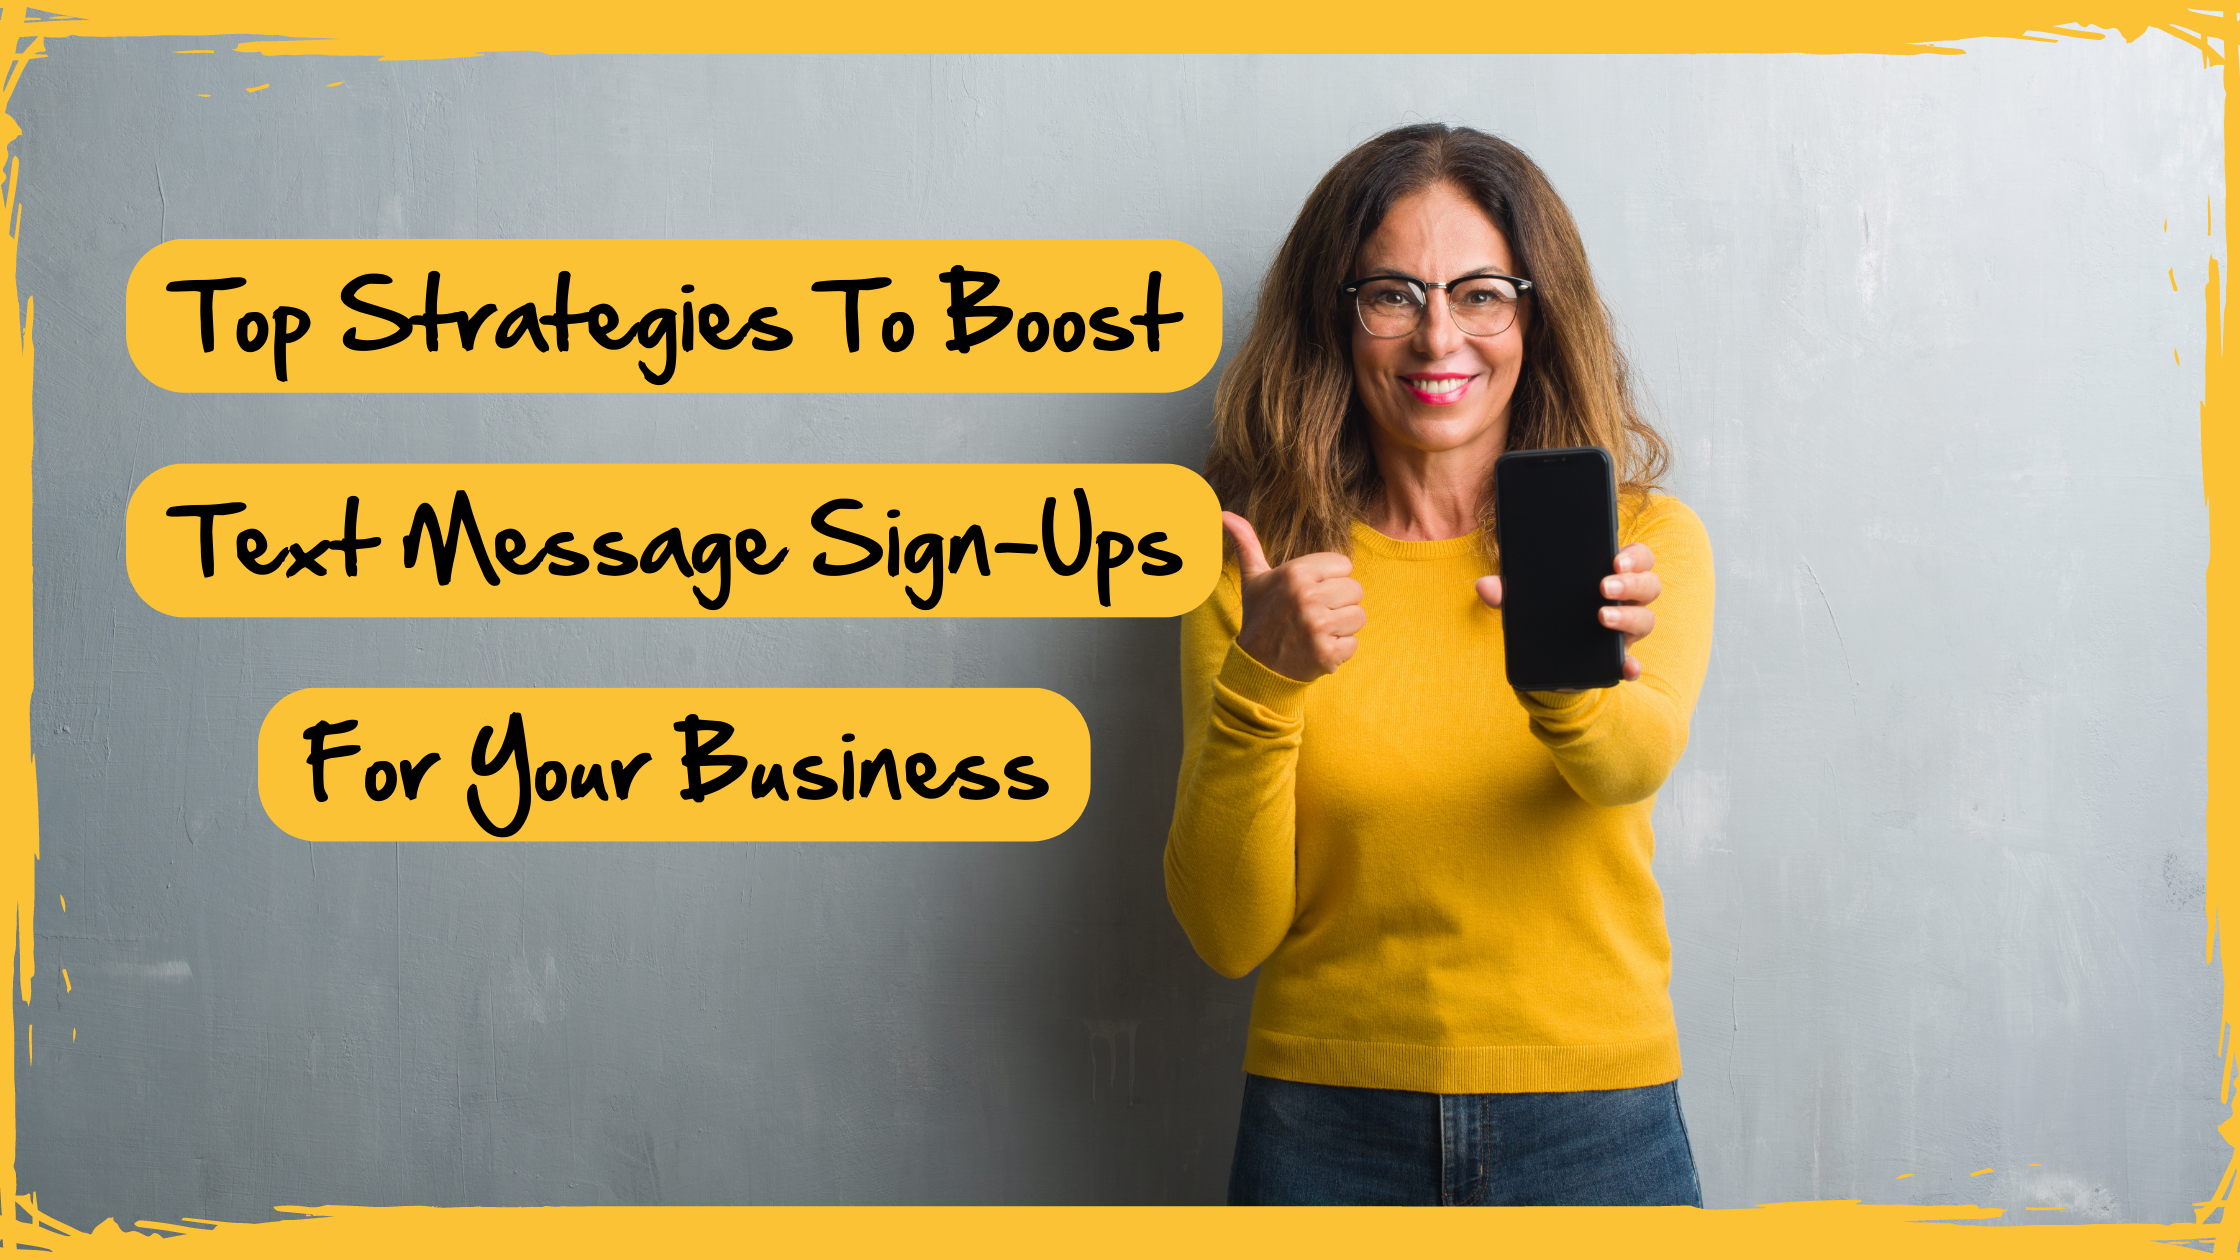 Top Strategies to Boost Text Message Sign Ups For Your Business